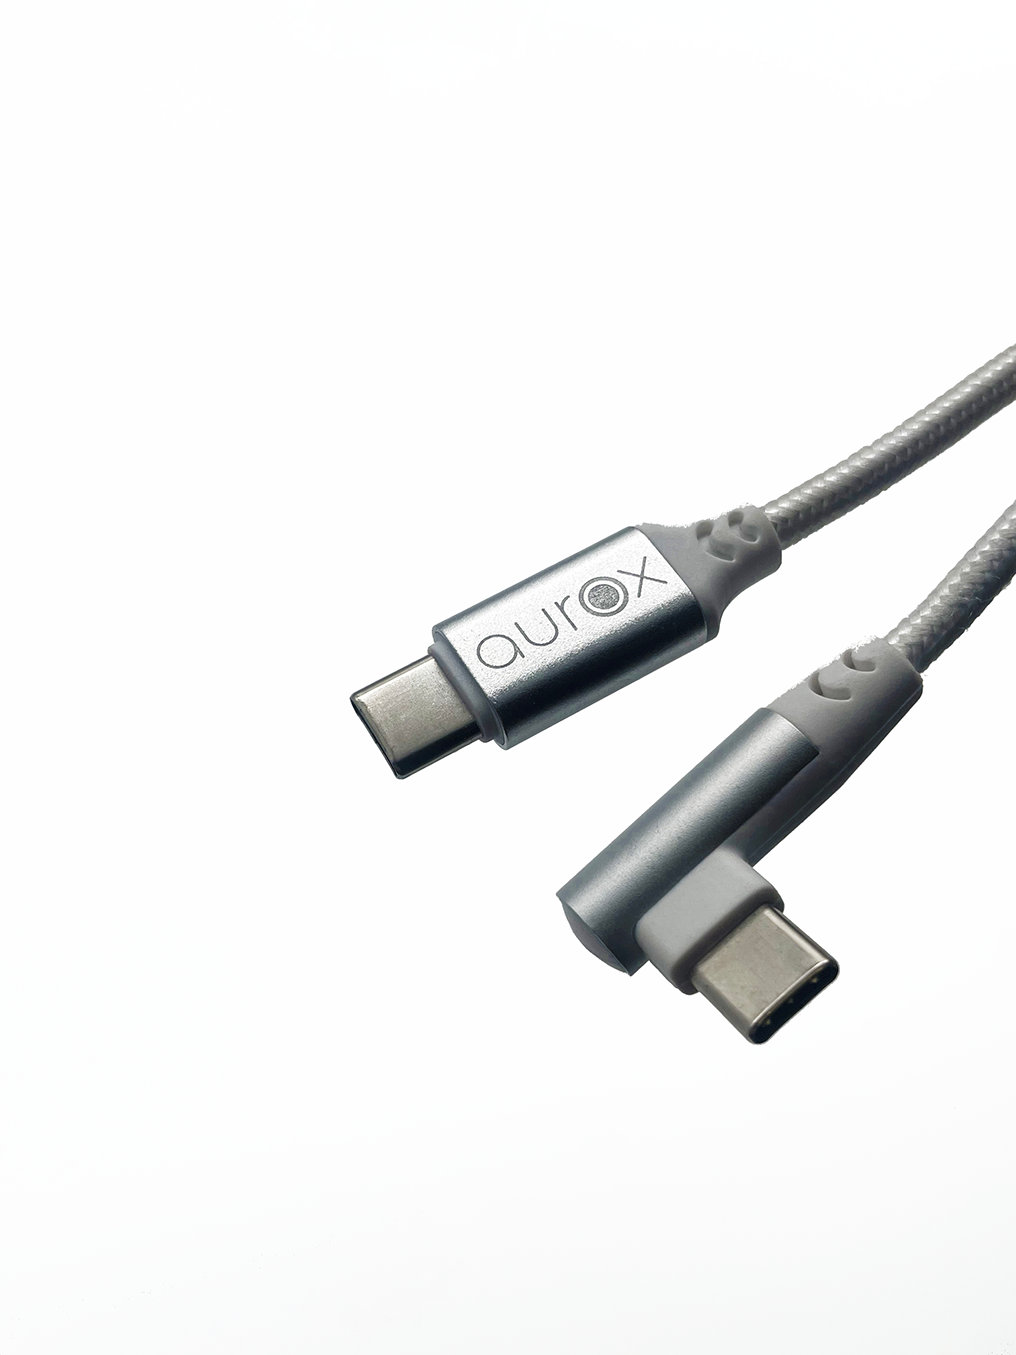 Fast Power Delivery With USB-C Cable included